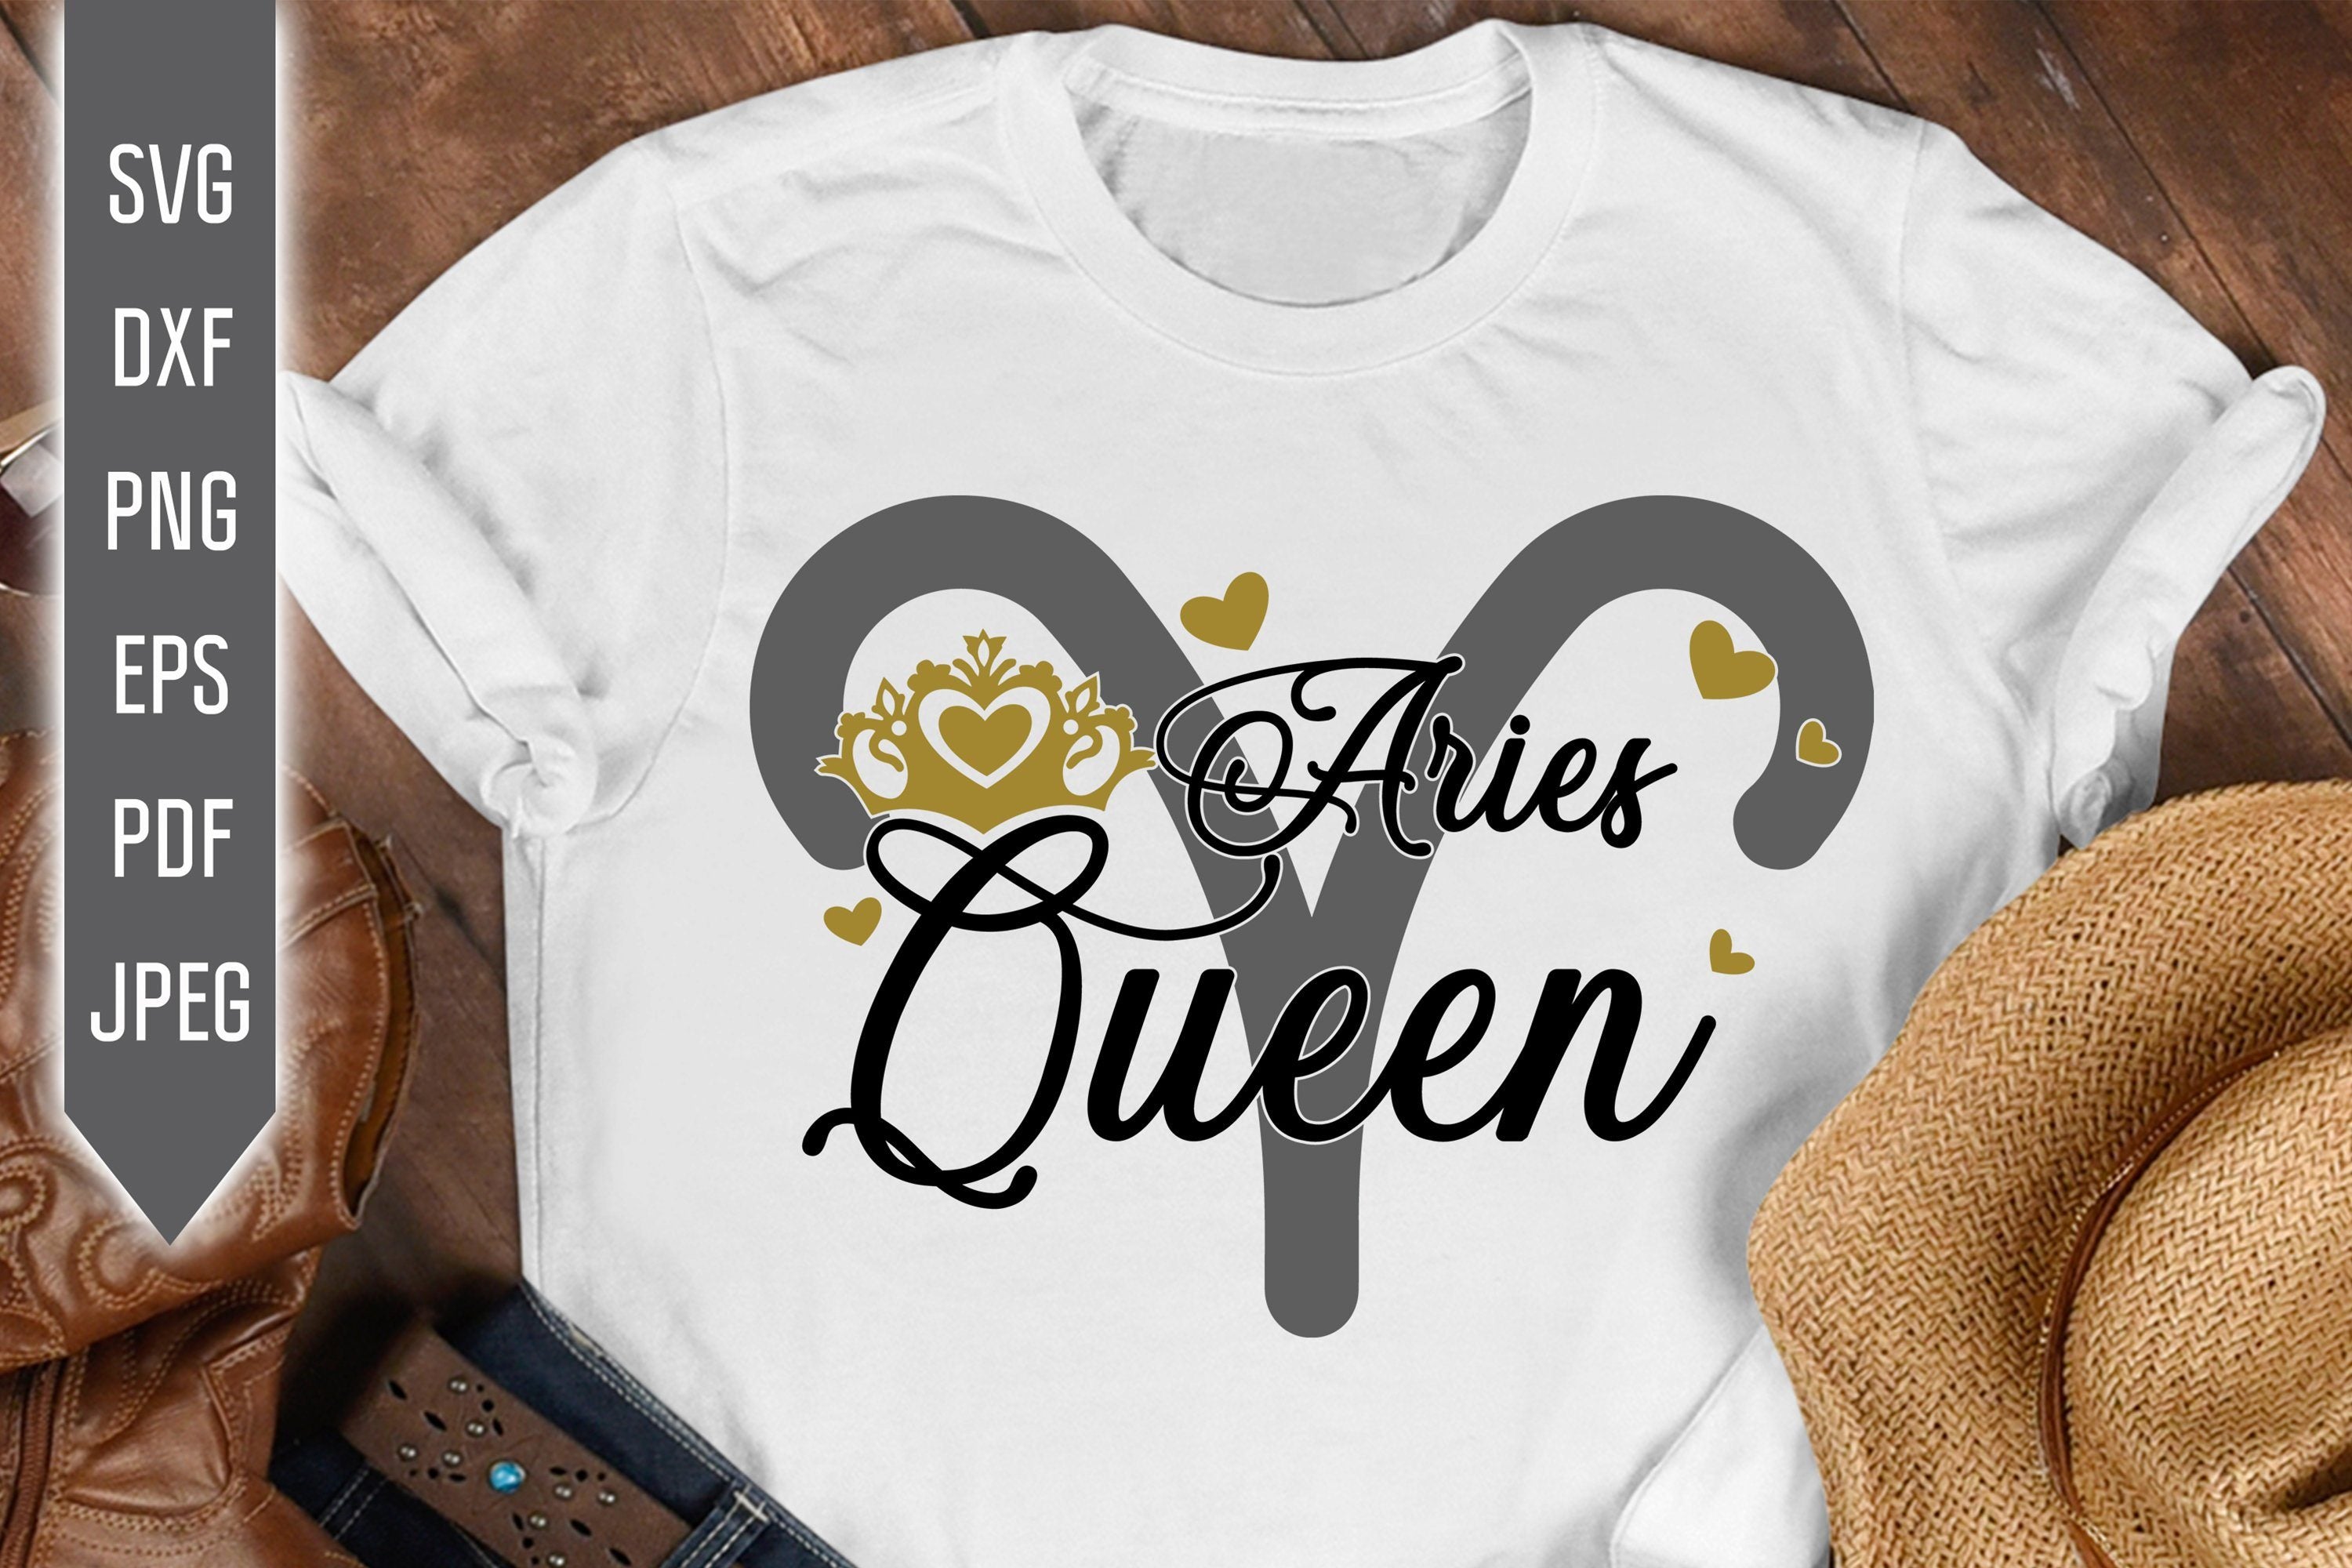 Download Aries Queen Svg Zodiac Sign Svg Horoscope Svg Aries Sign Svg Aries Shirt April Svg Aries Birthday Svg Cricut Silhouette Dxf Eps Png So Fontsy